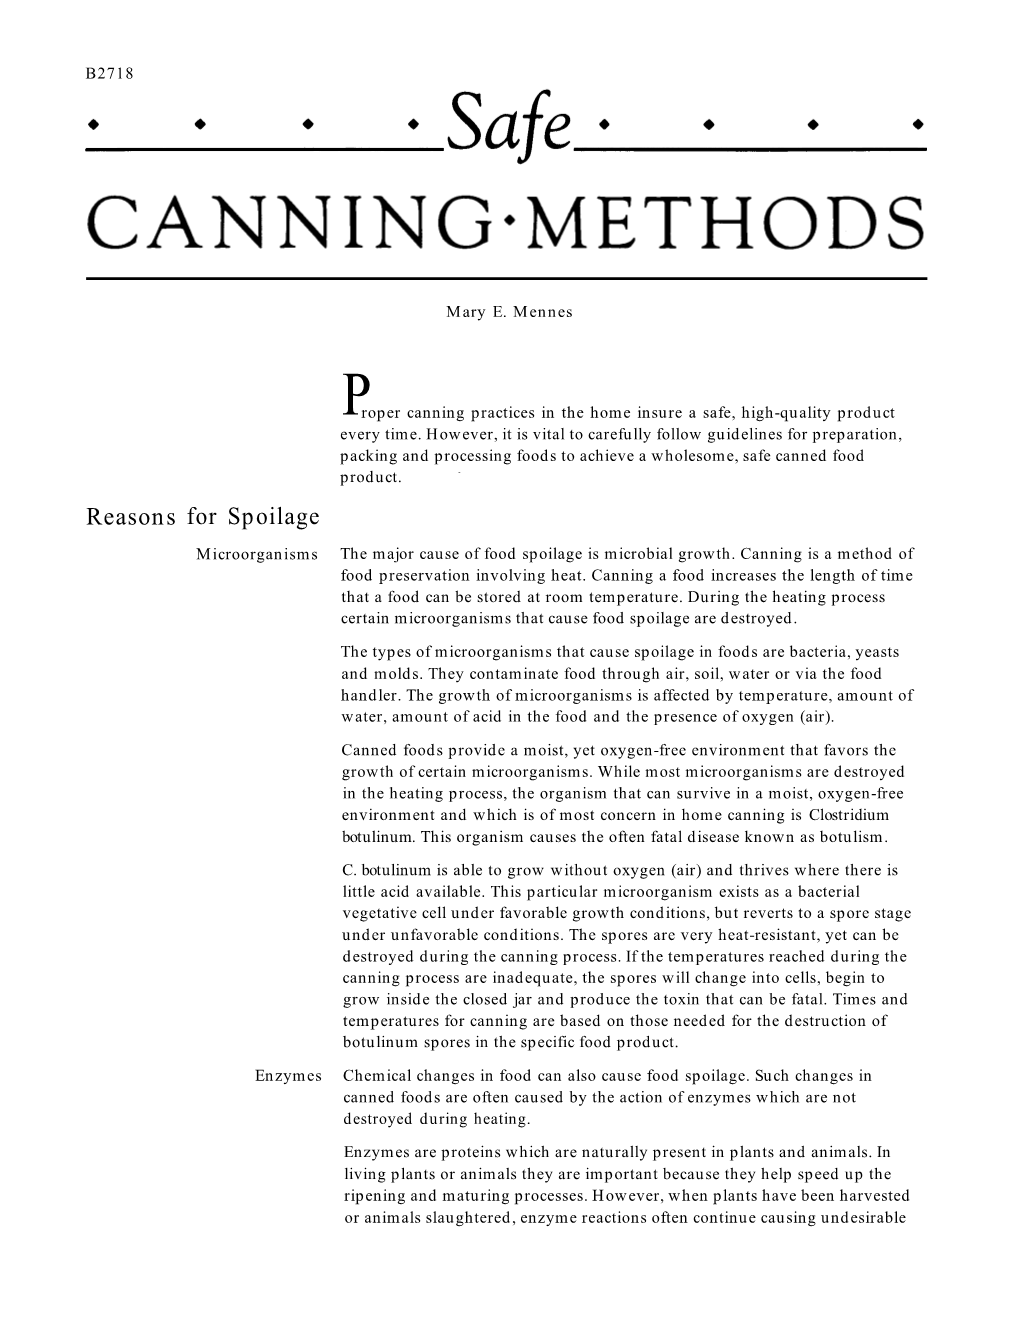 Safe Canning Methods (1991) RP-06-94-2M-25-E